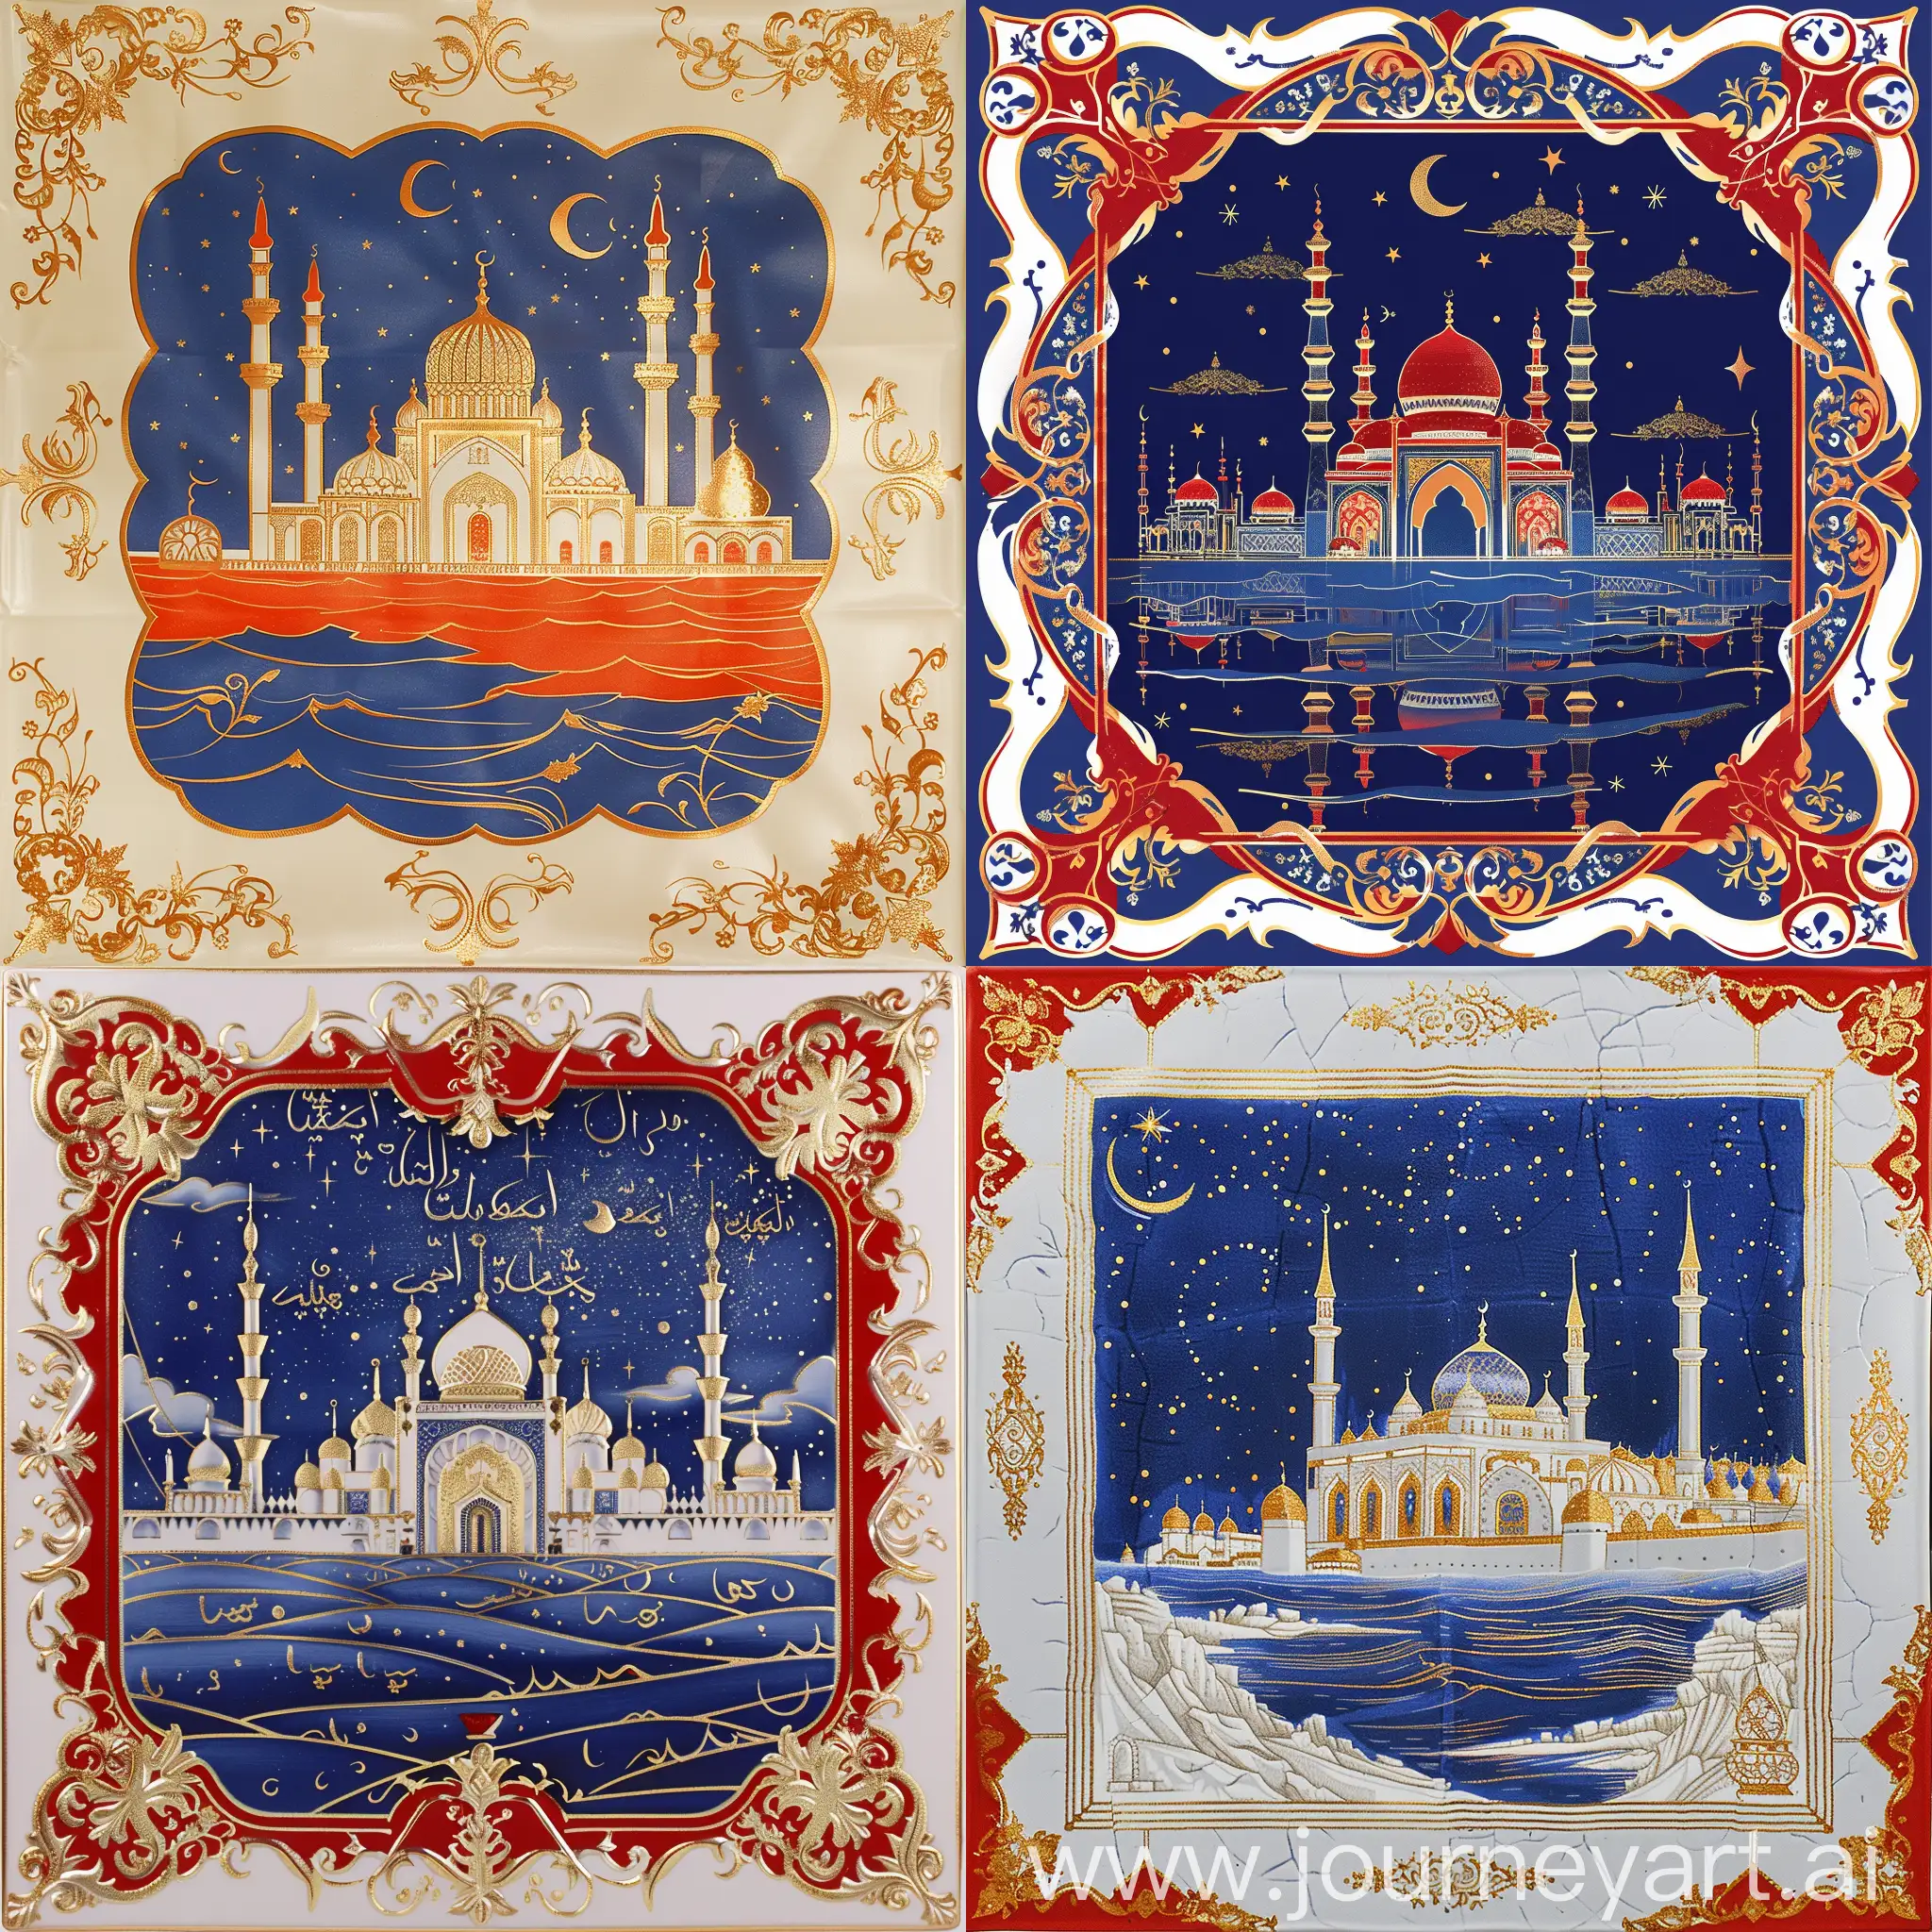 a lusterware having red blue islamic style iznik and arabesque decorated ornaments on white border, depicting a fantasy grand persian mosque beyond sea under night sky, golden outlines